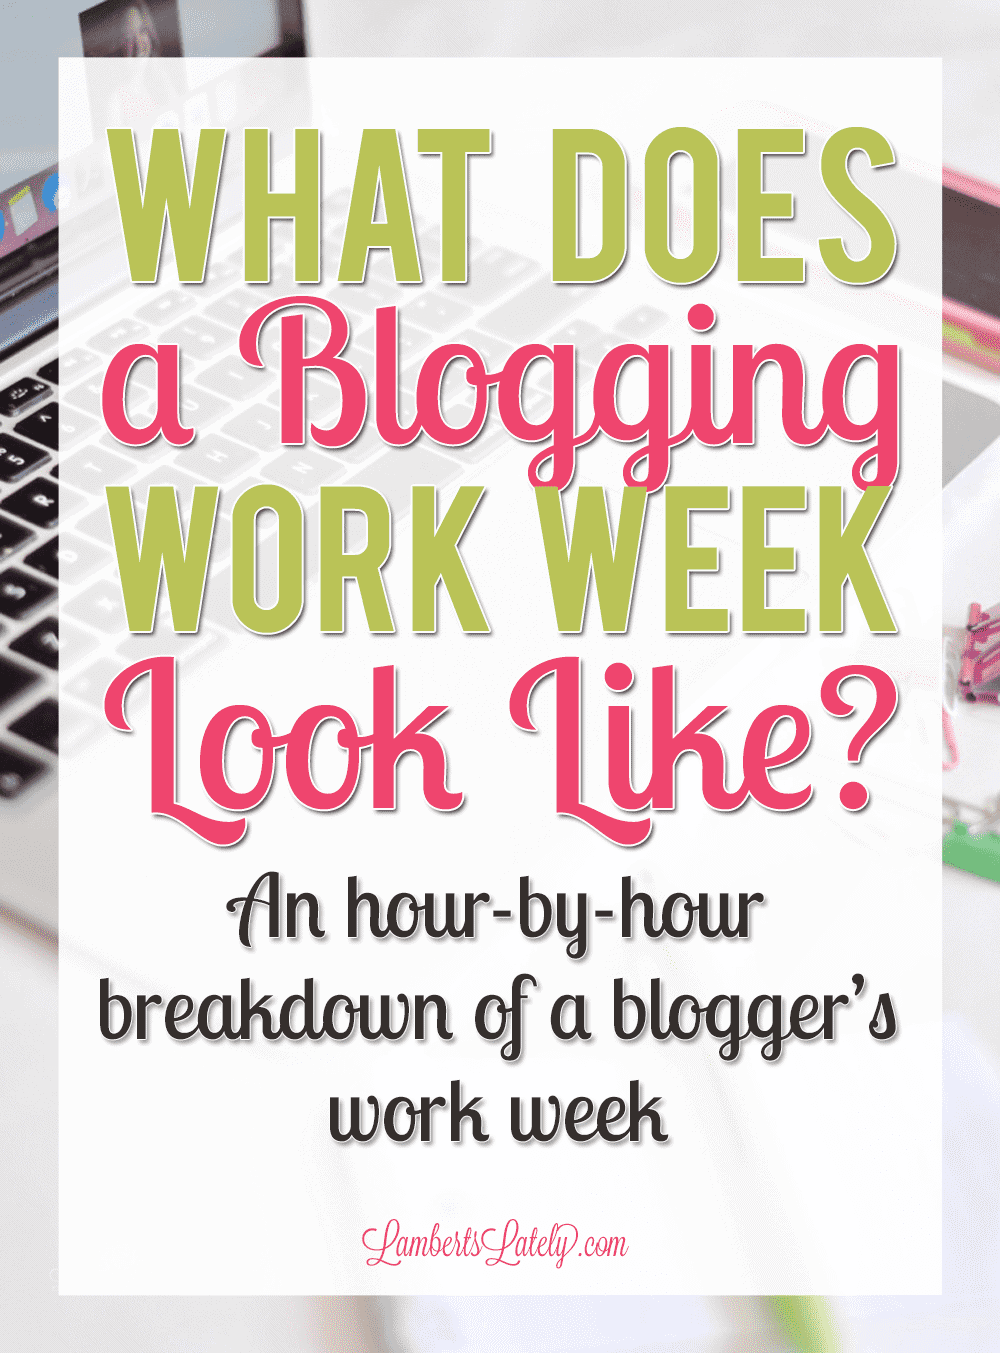 This post is a great example of a part-time or full-time blogger work schedule! She breaks it down into hourly chunks by responsibility and includes social media scheduling, content creation, and website/email maintenance.